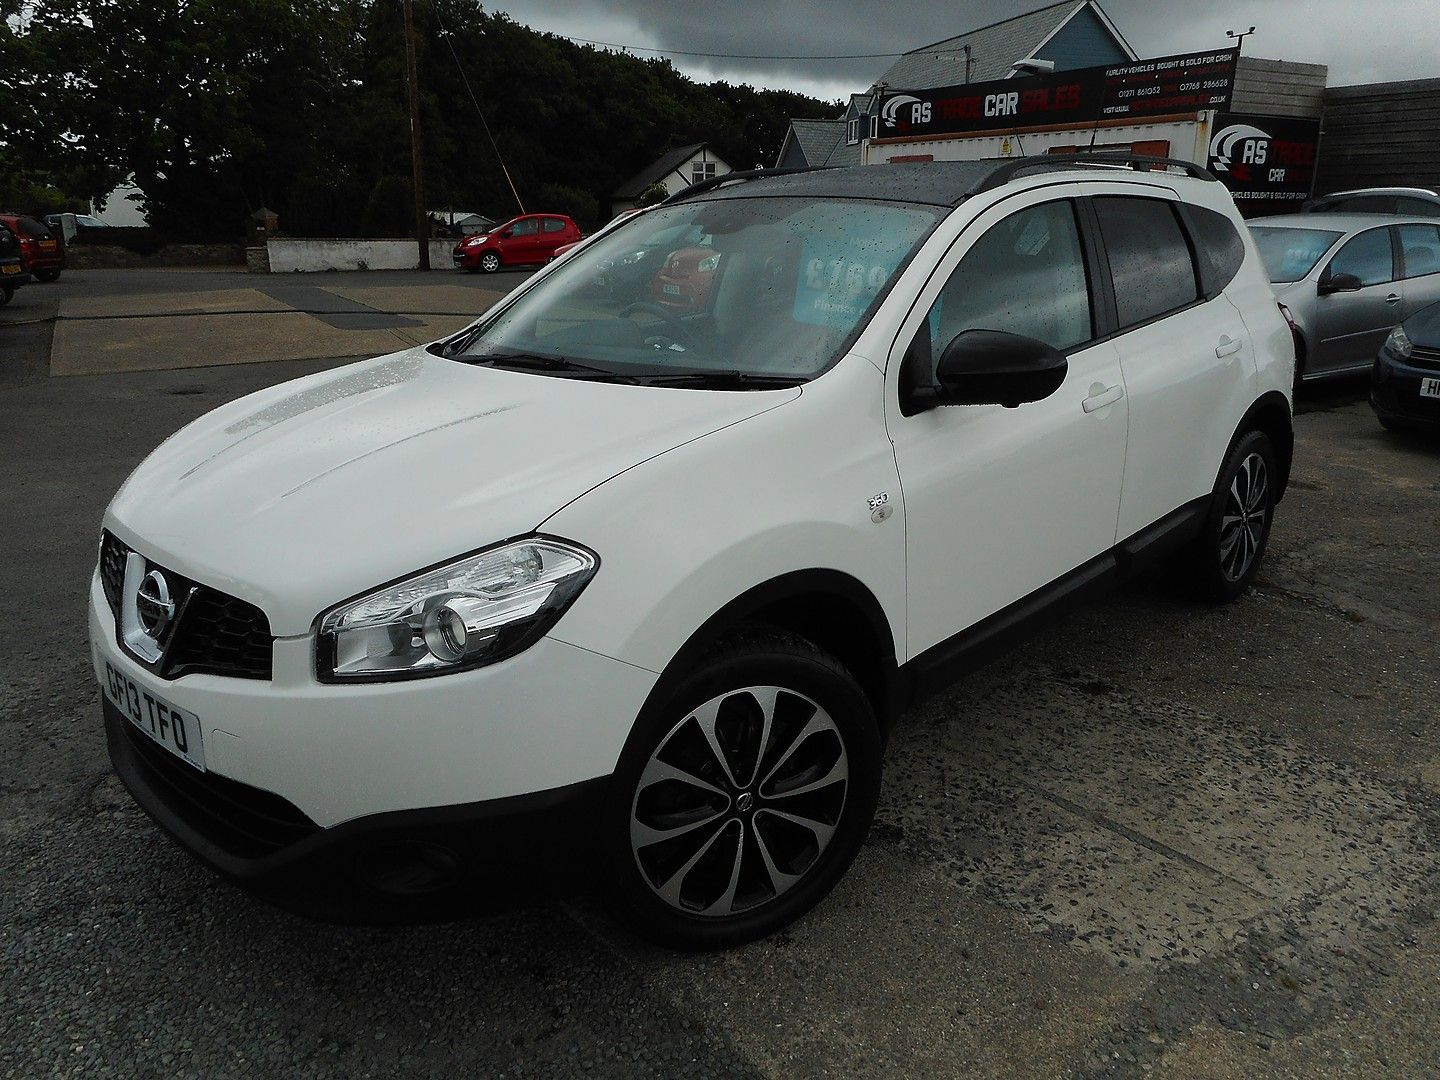 NISSAN QASHQAI 360 1.5 dCi 7 SEATER (2013) - Picture 5